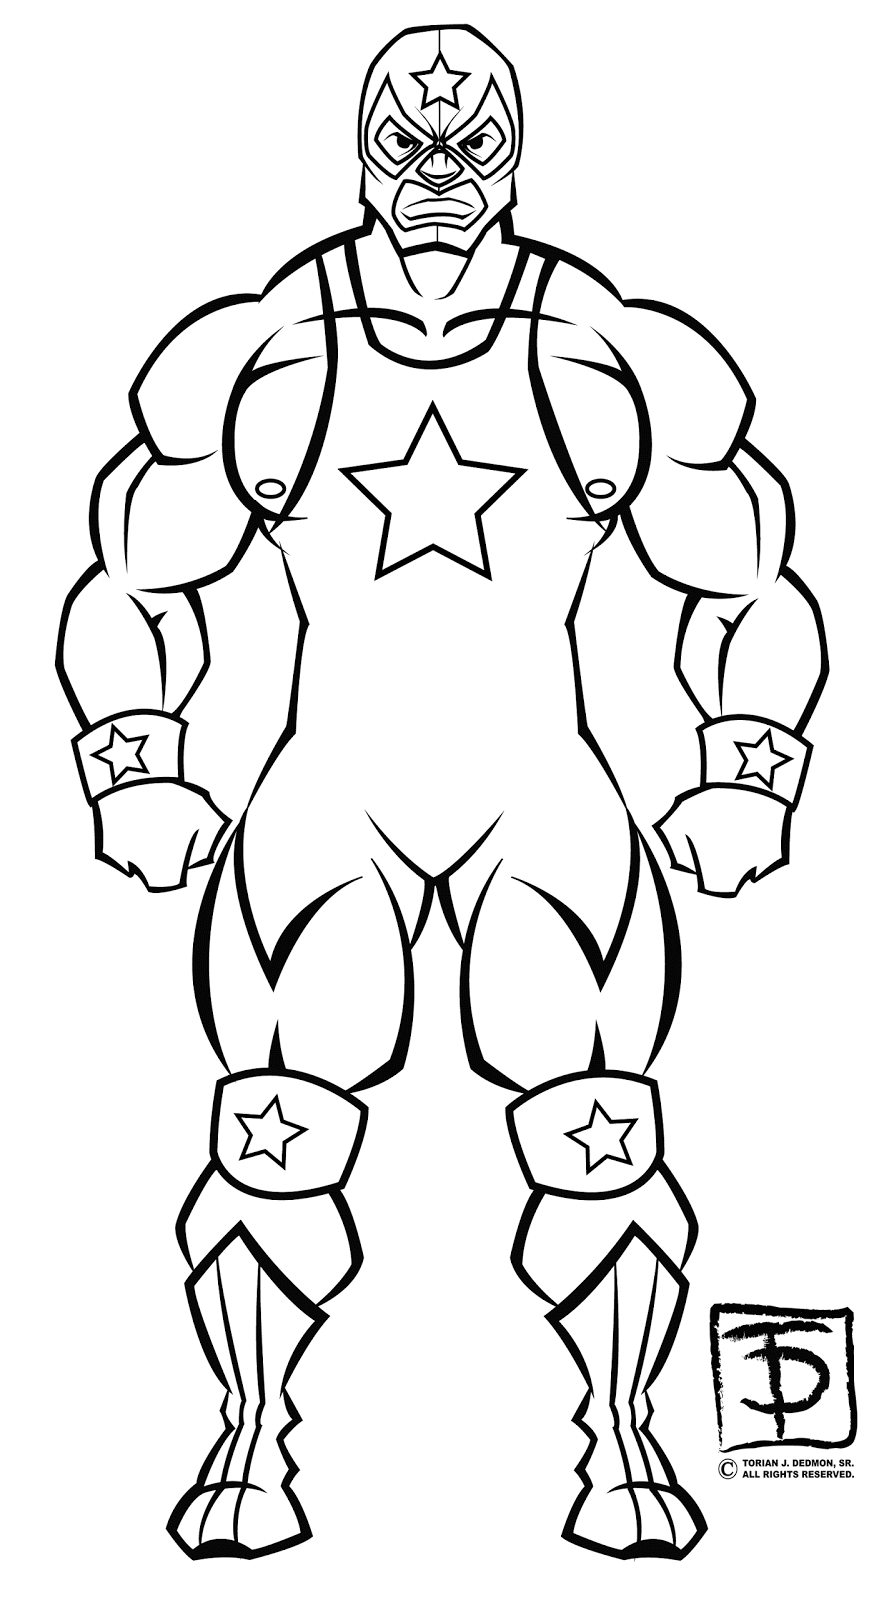 Download WWE Coloring Pages